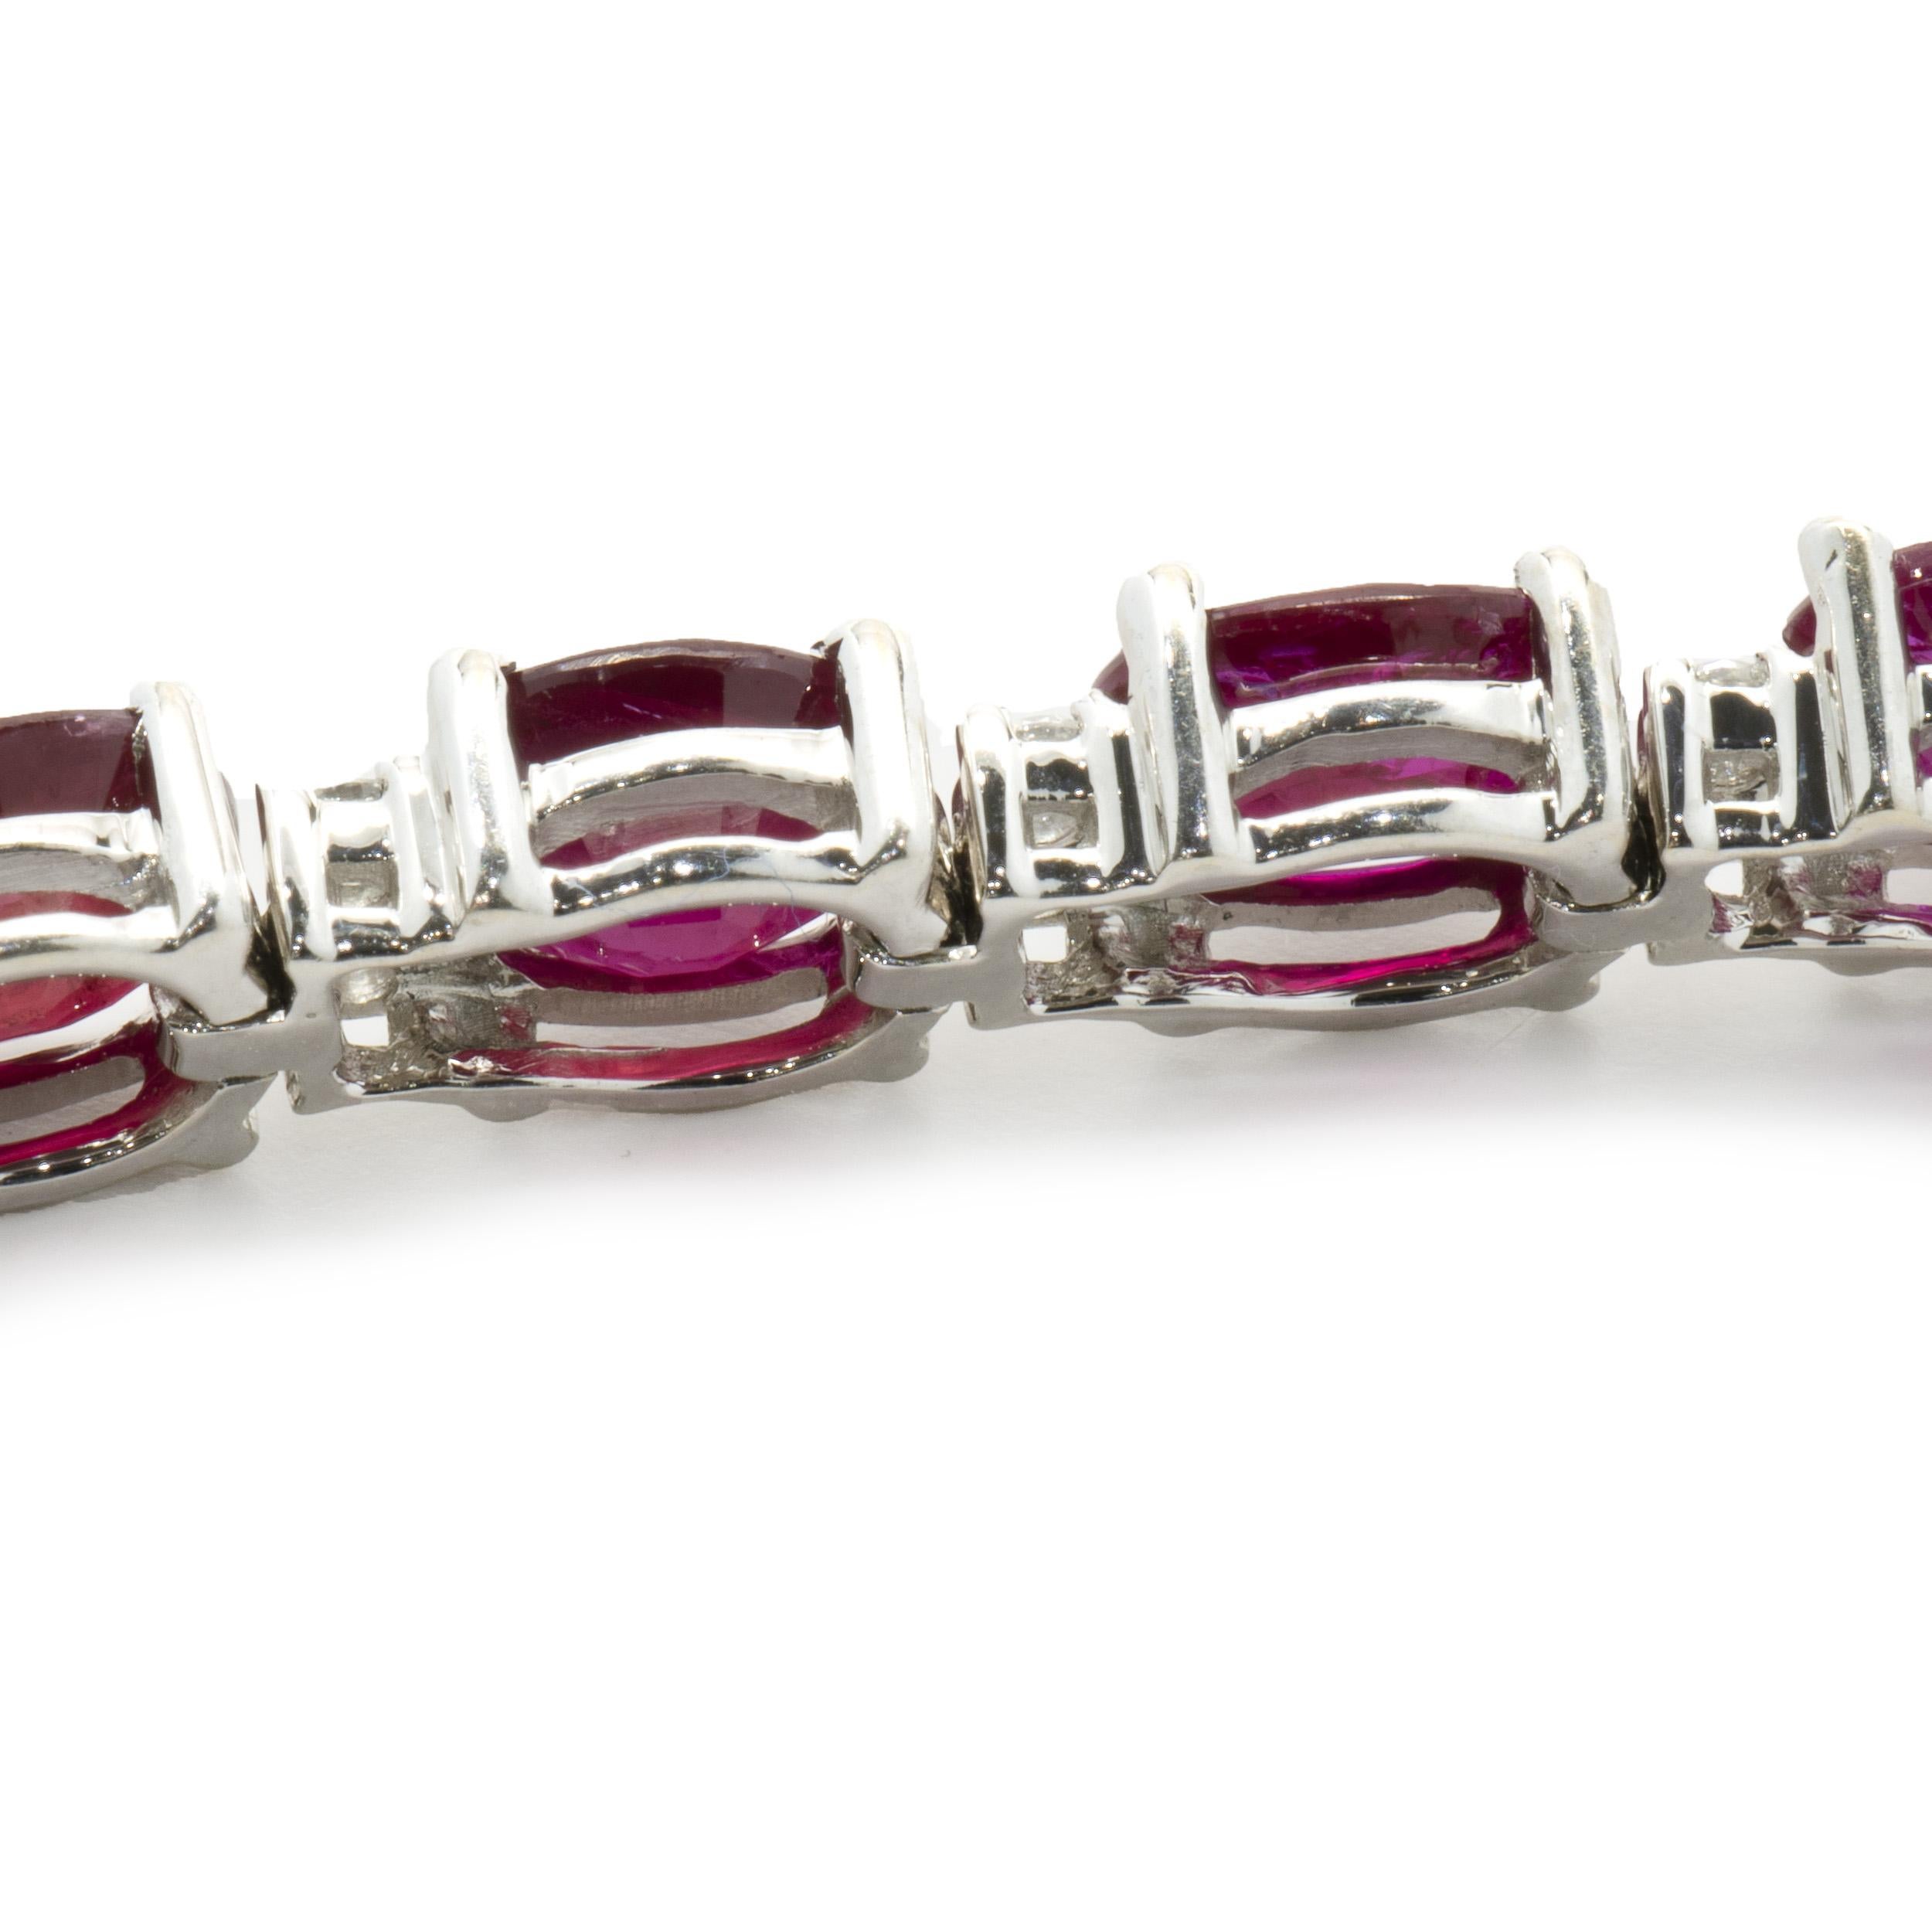 Designer: custom
Material: 18K white gold
Diamond: 42 round brilliant cut = 0.67cttw
Color: I
Clarity: SI2
Ruby: 21 oval cut = 12.80cttw
Weight:  14.40 grams
Dimensions: bracelet will fit up to a 6.5-inch wrist